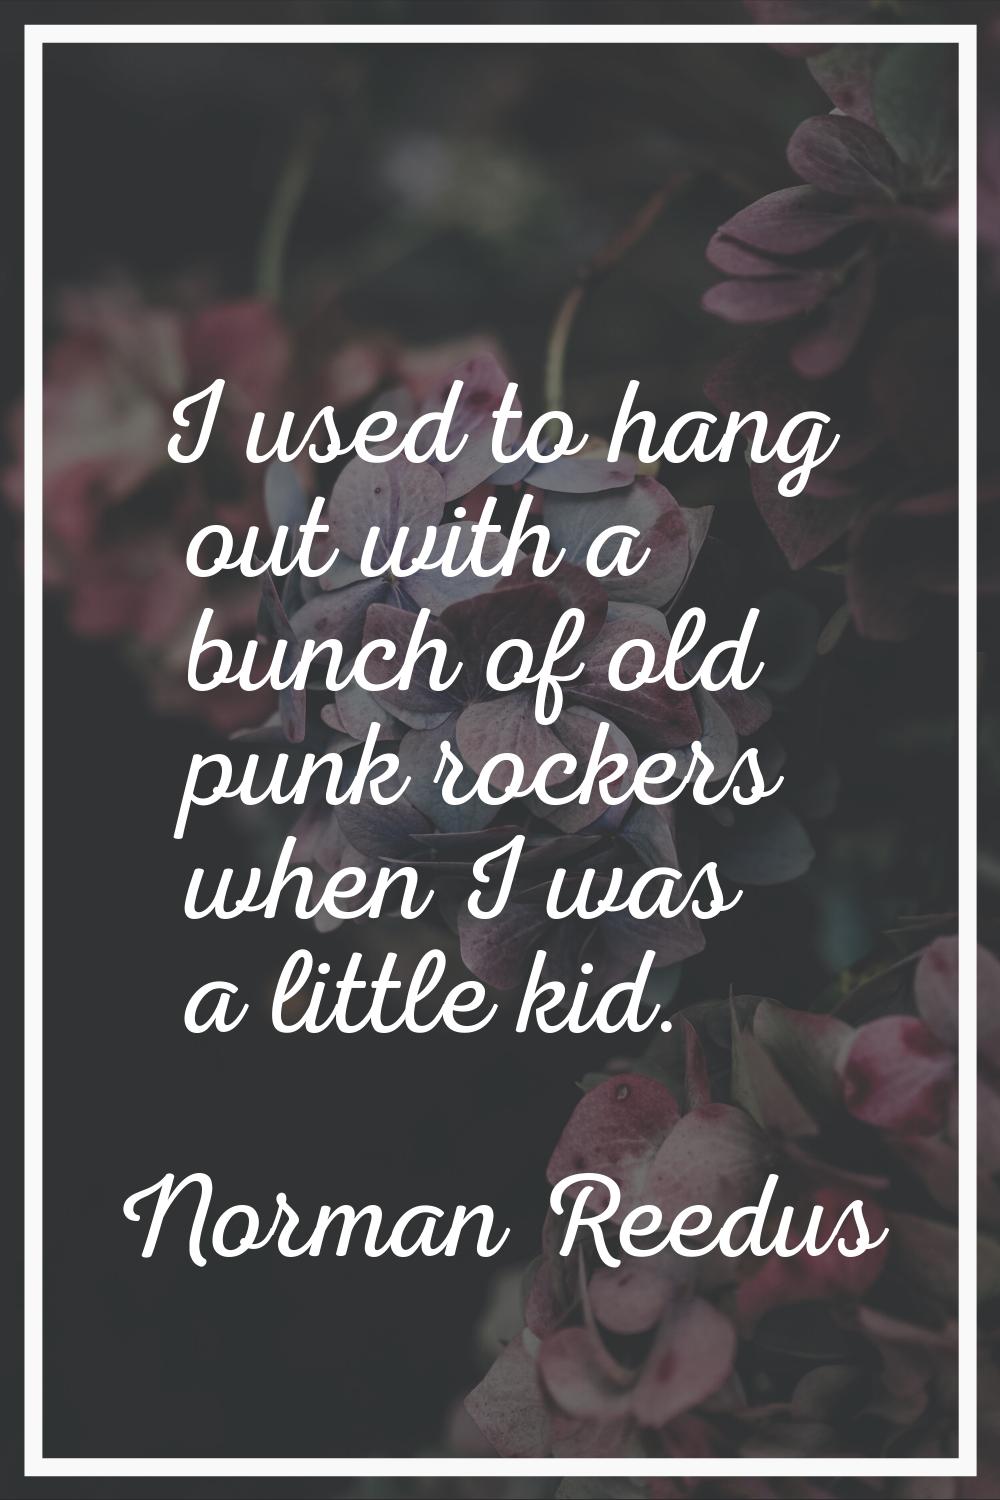 I used to hang out with a bunch of old punk rockers when I was a little kid.